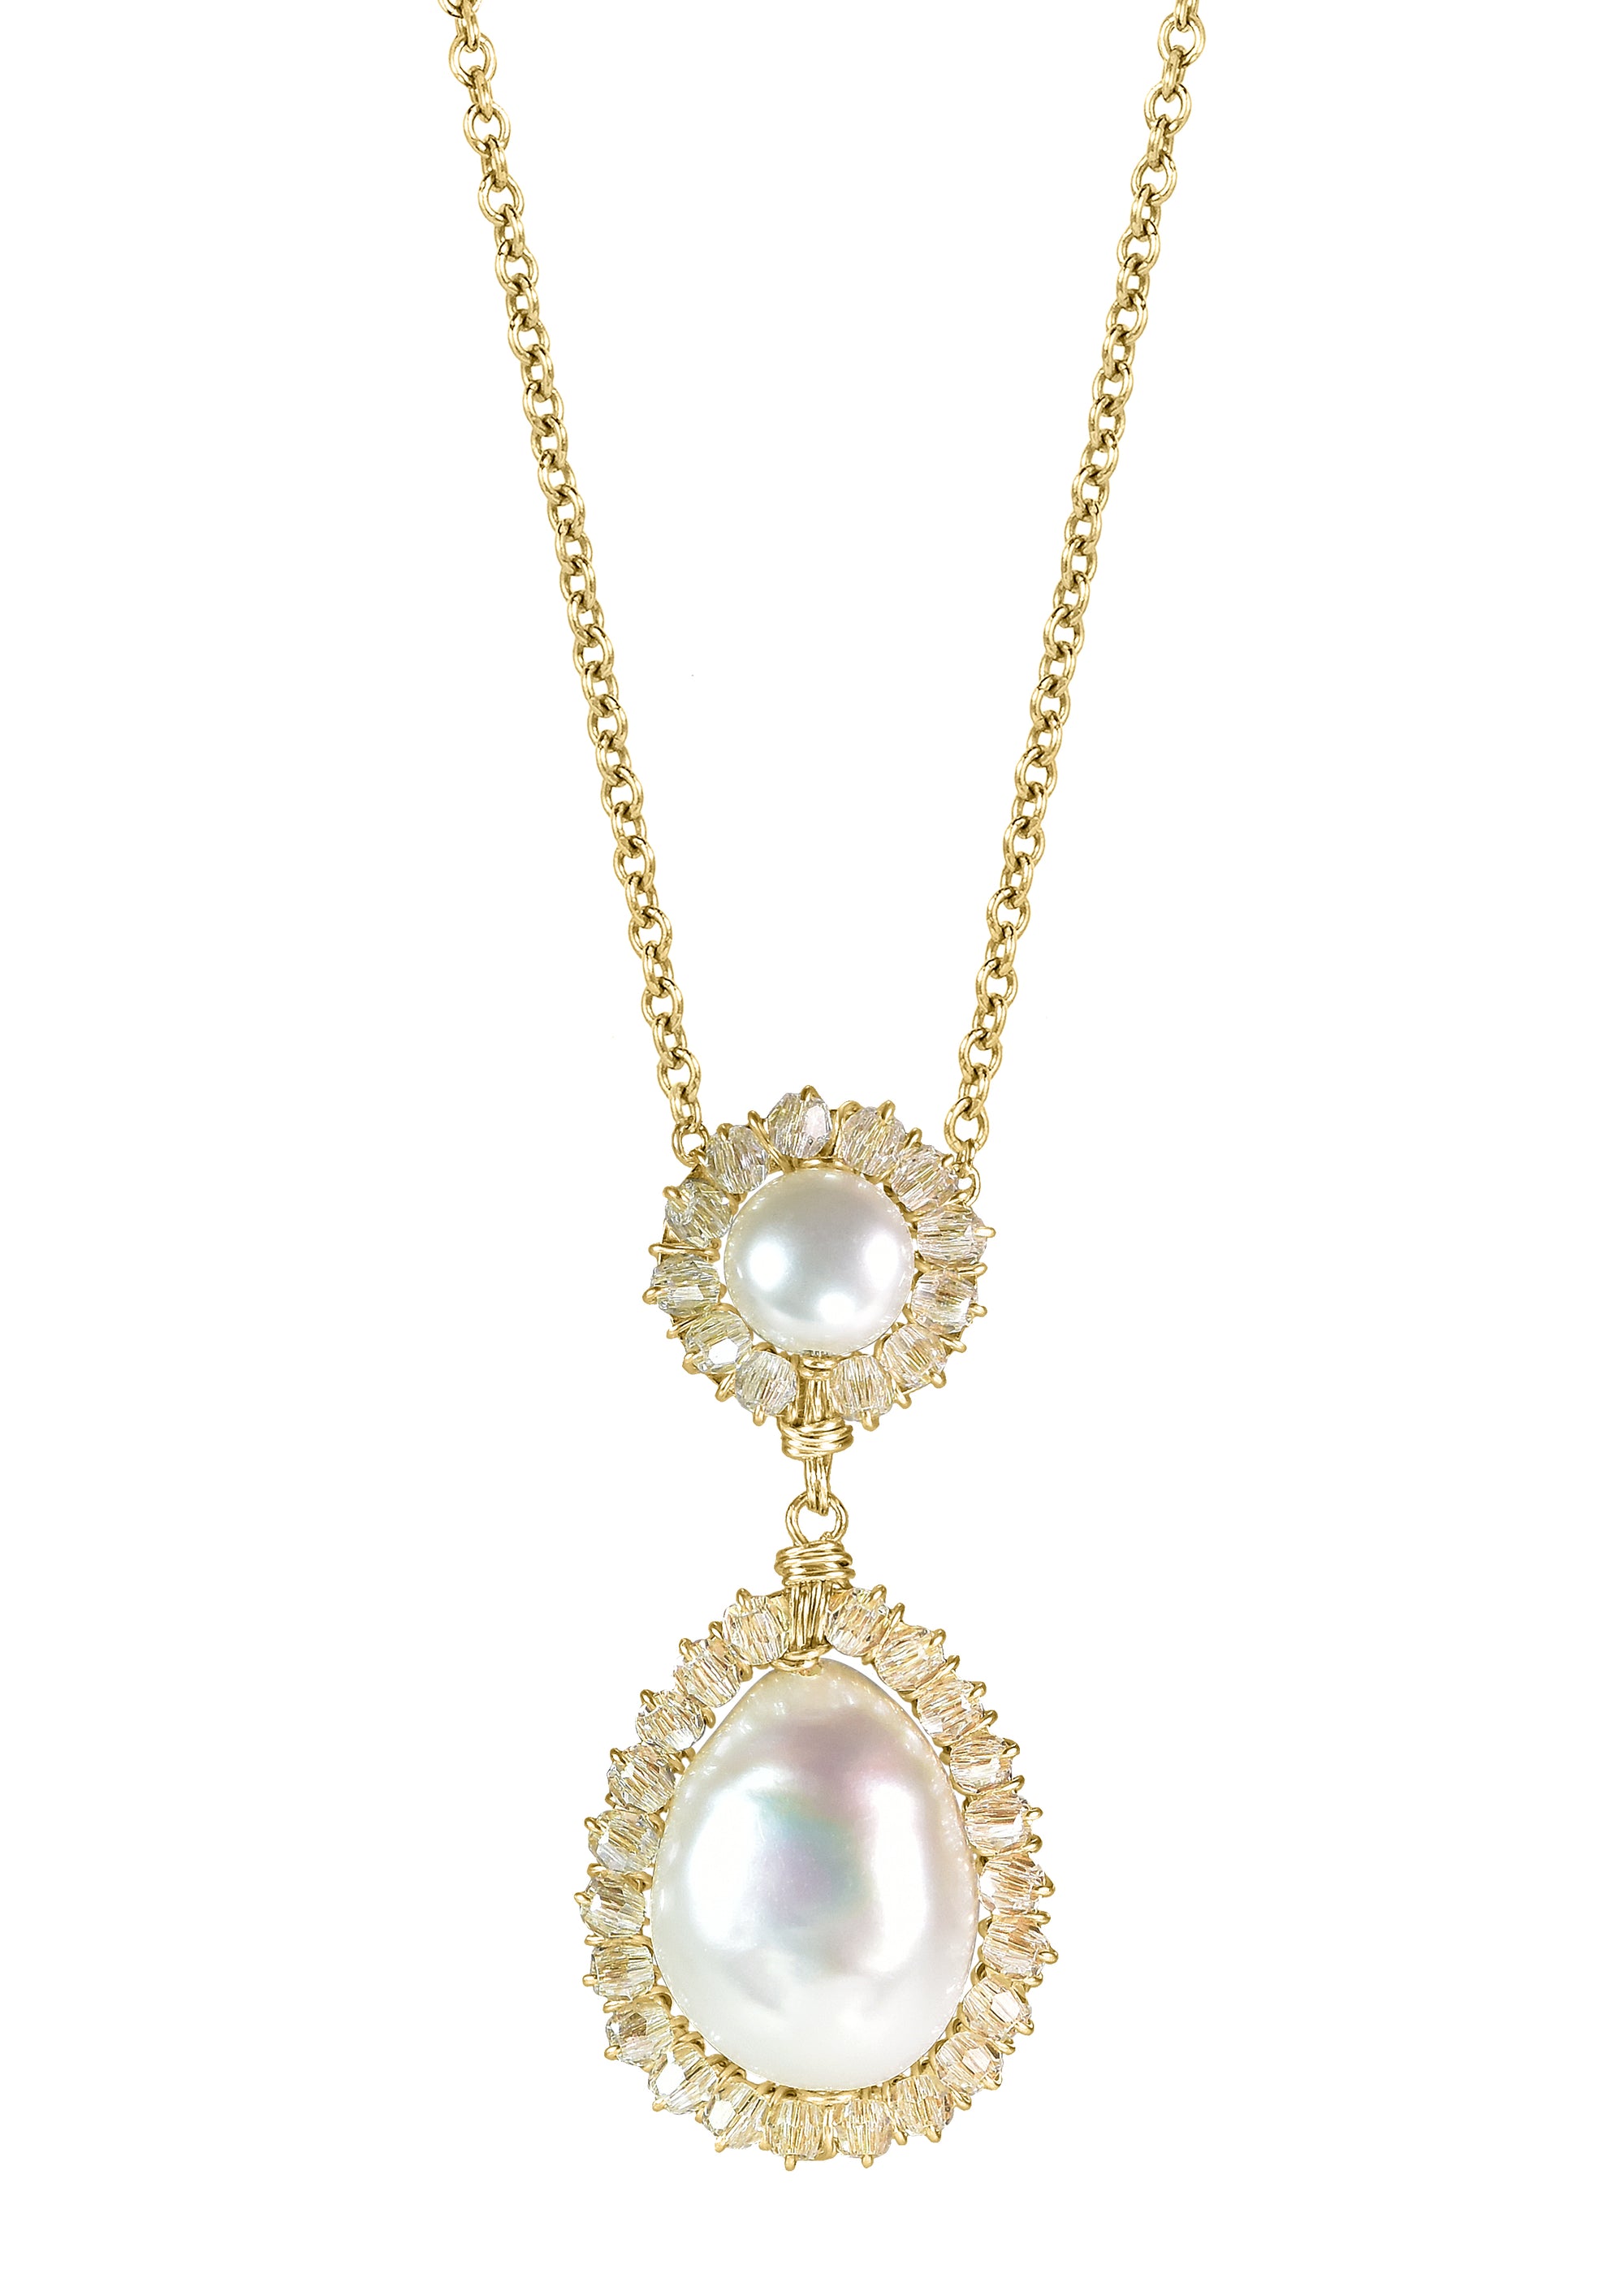 Crystal Freshwater pearl 14k gold fill Necklace measures 16-1/8" in length Pendant measures 1-1/8" in length and 1/2" in width at the widest point Handmade in our Los Angeles studio